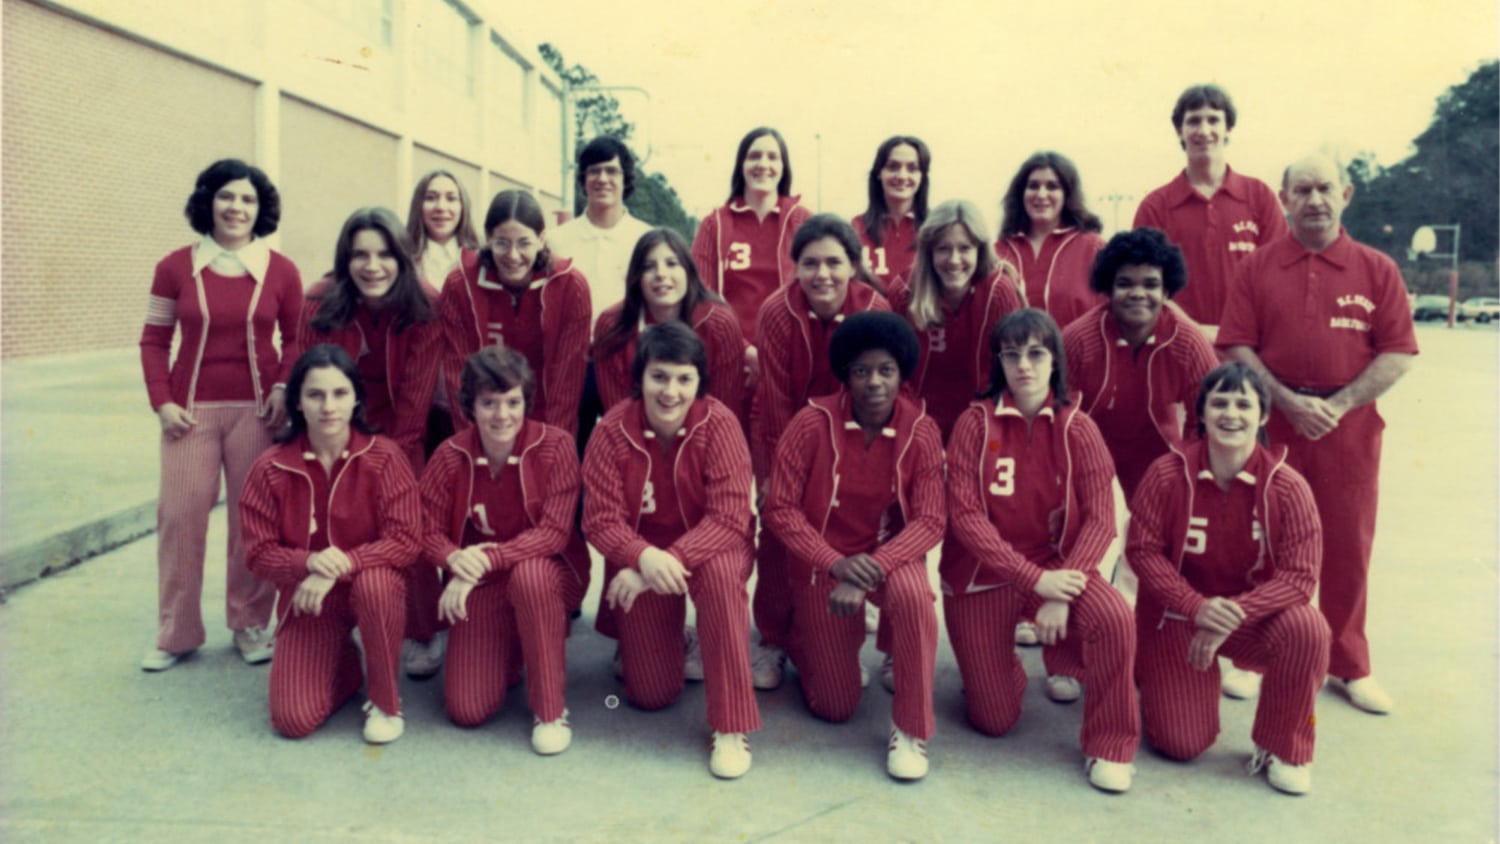 A group photo of the 1974-75 NC State Women's Basketball Team